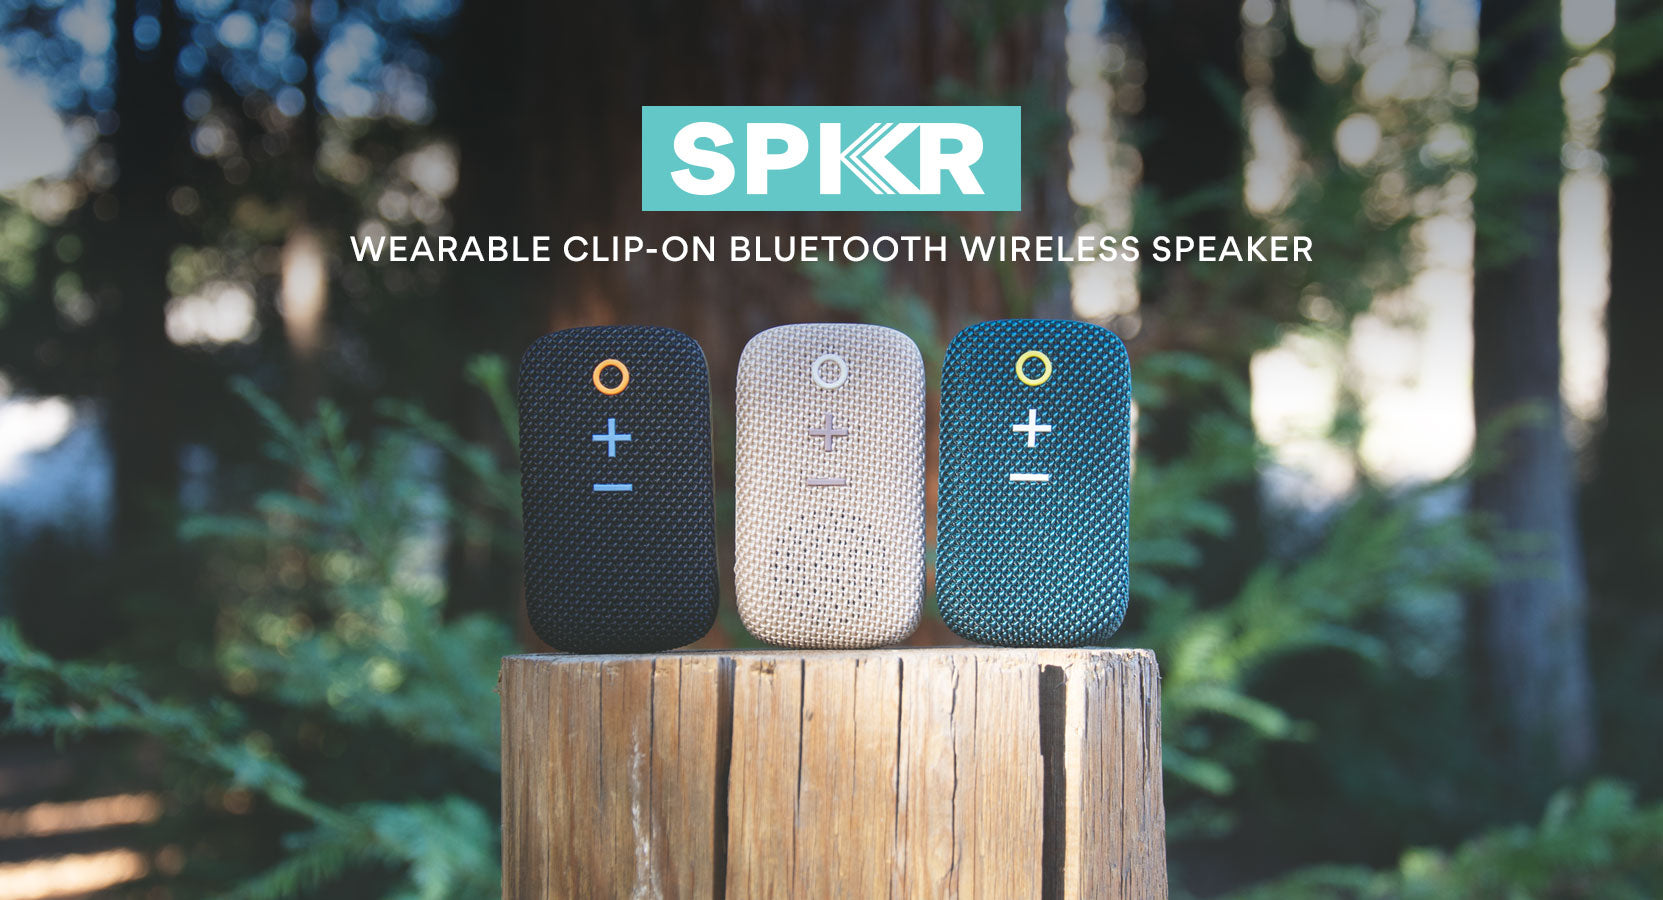 Promotional image of three spkr wearable clip-on bluetooth wireless speakers, displayed on a wooden stump with a blurred forest background. the speakers are in black, white, and blue colors.